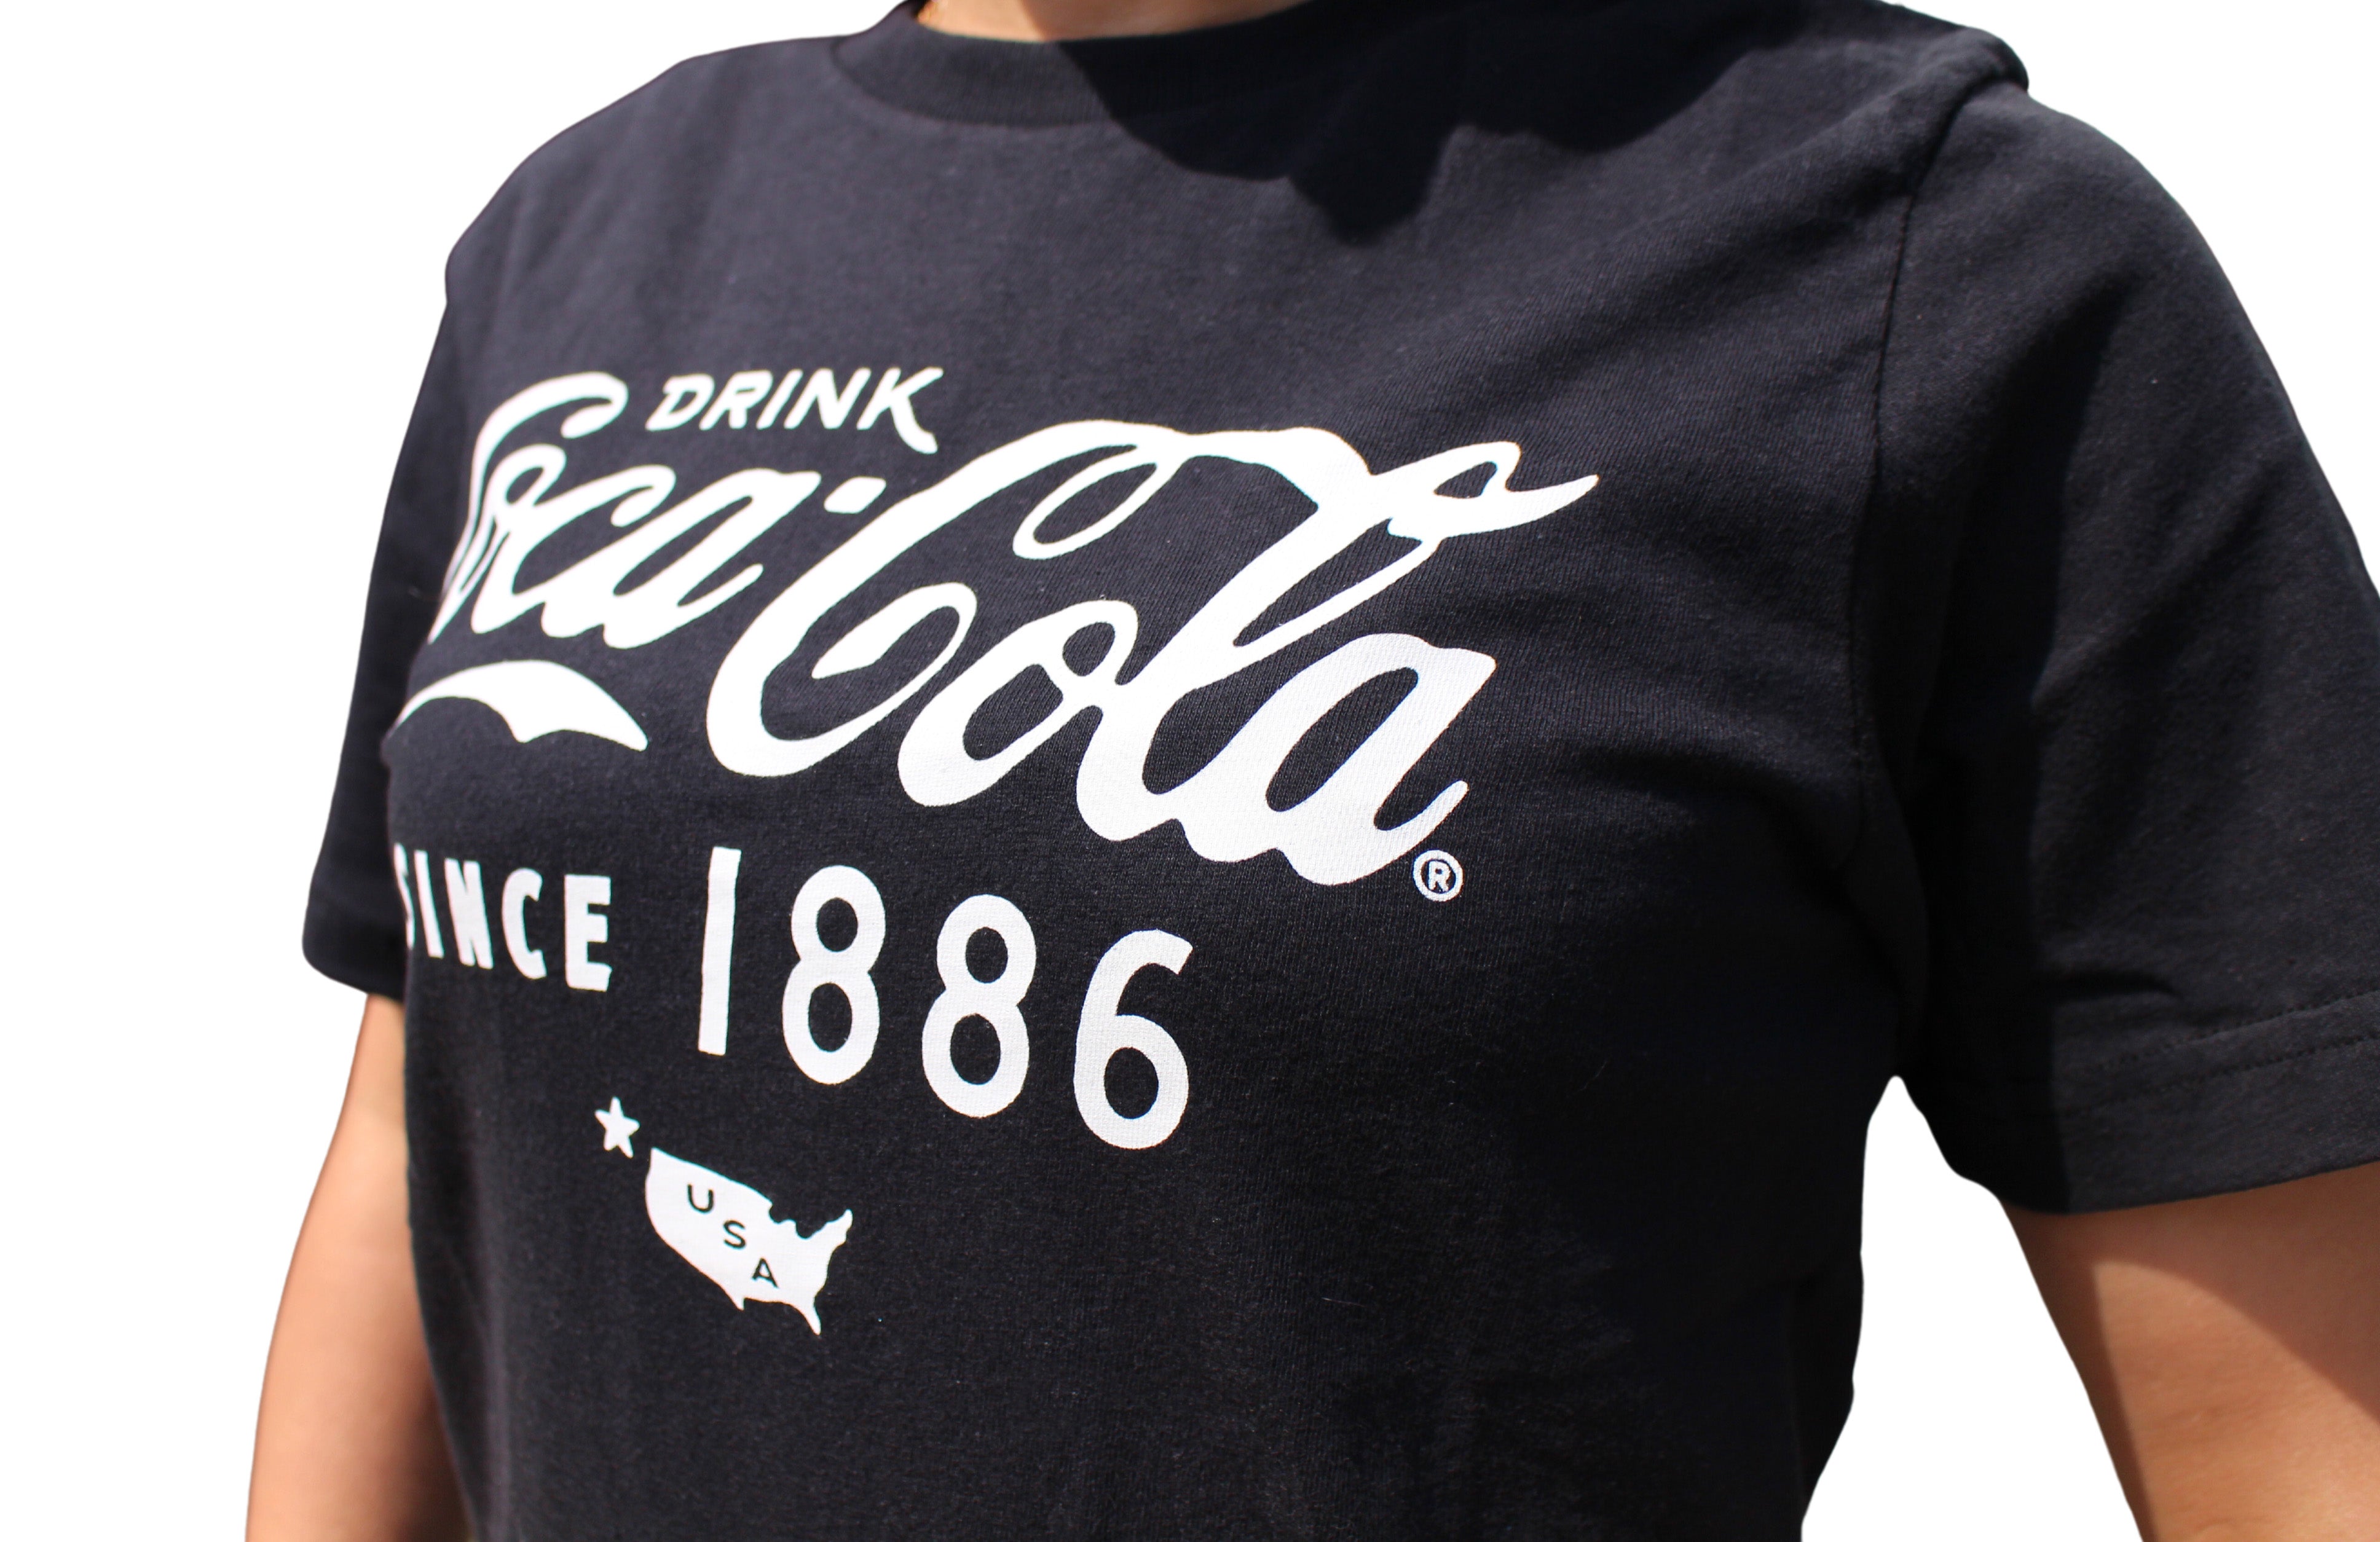 BRIEF INSANITY Coca-Cola Classic Vintage Black Short Sleeve T-shirt Close Up Front/Side Angle View